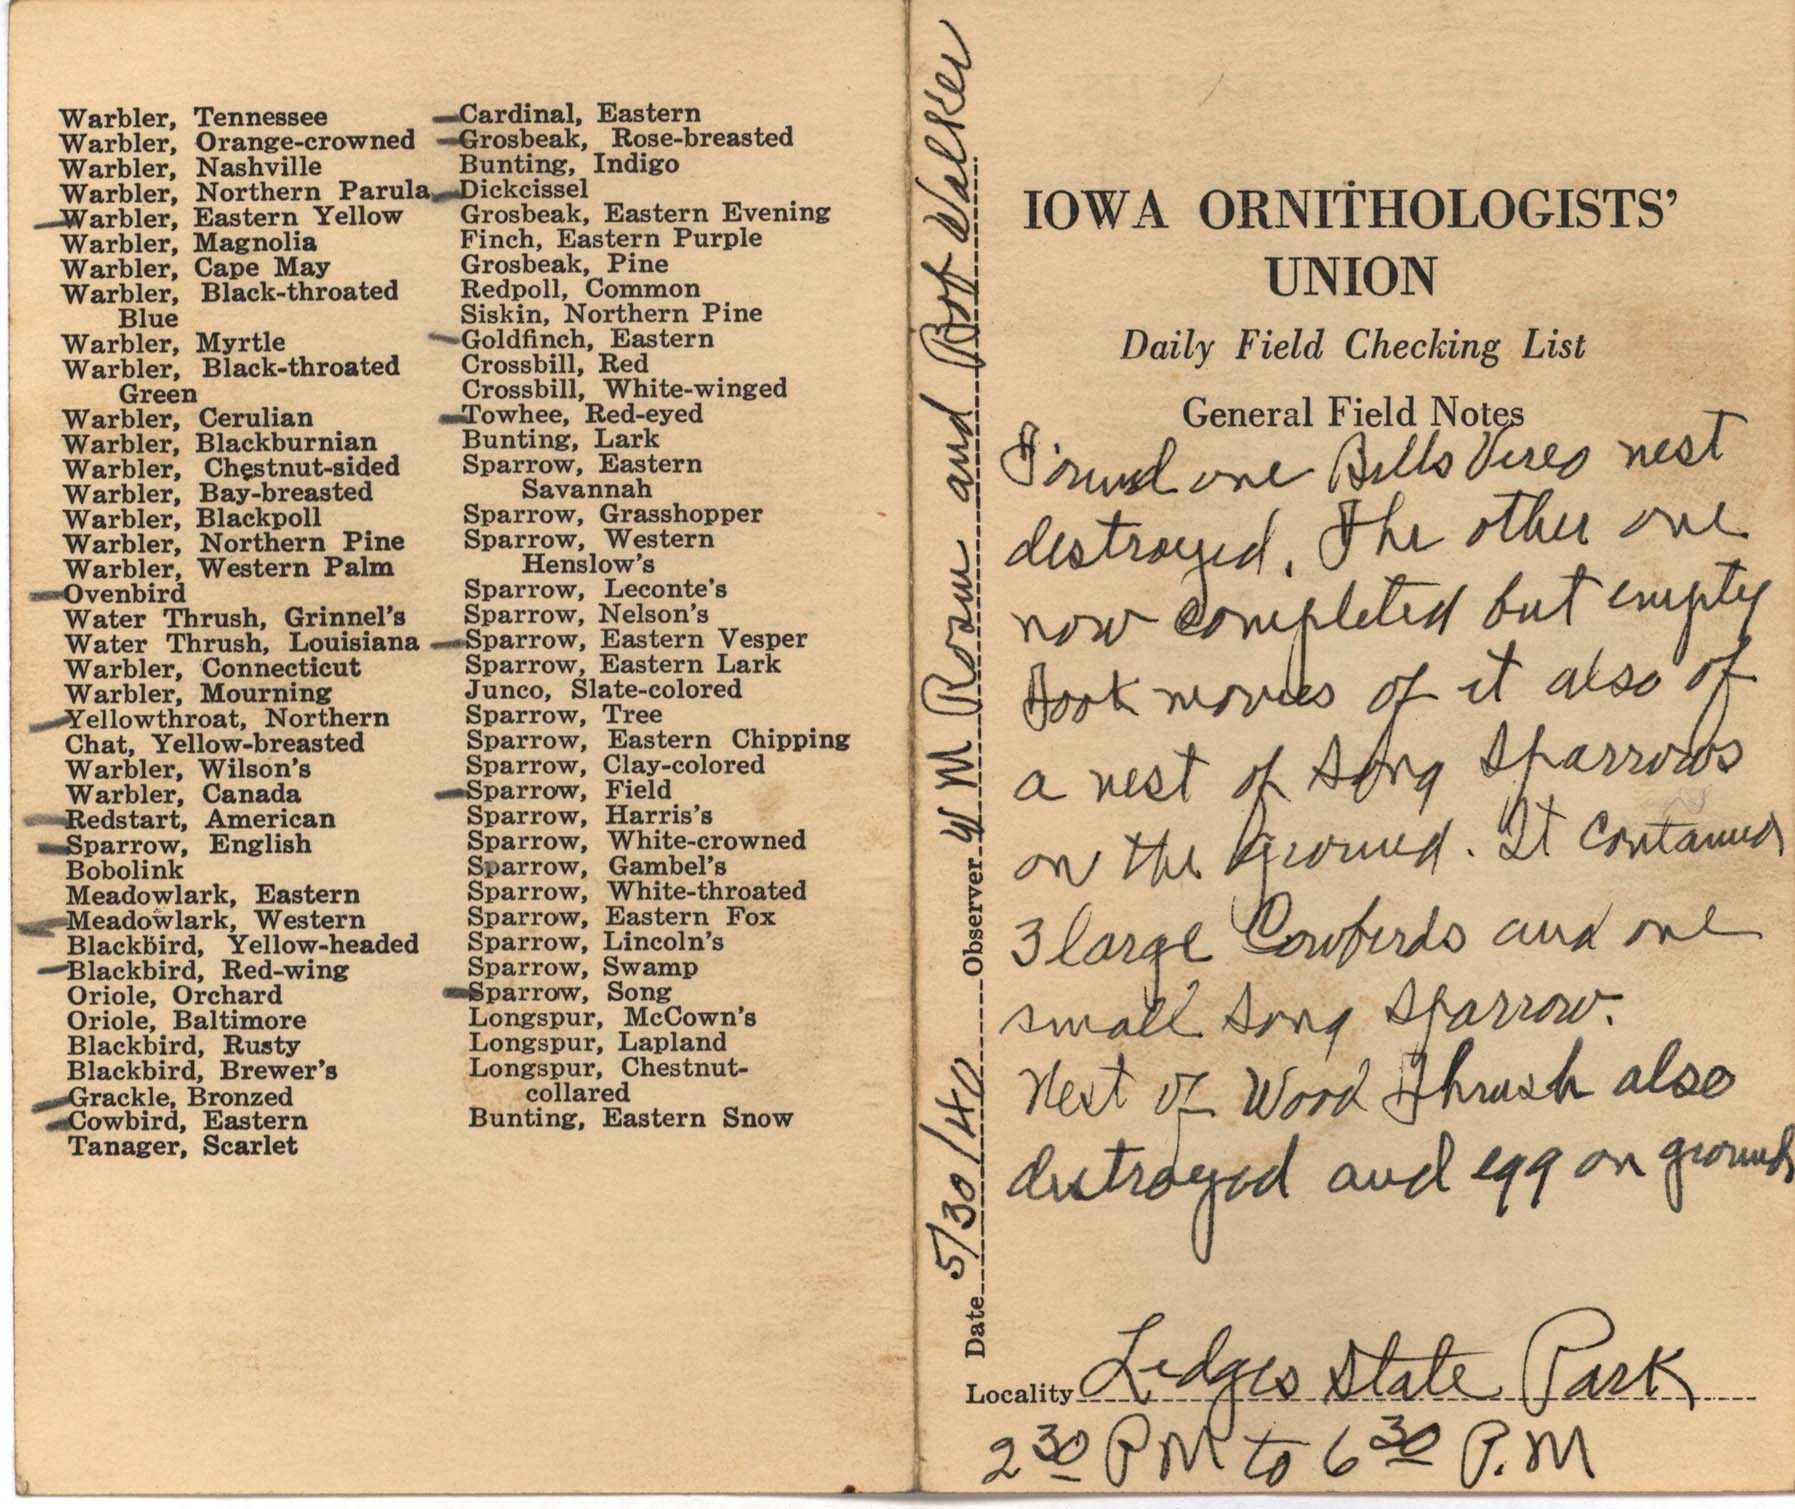 Daily field checking list by Walter Rosene, May 30, 1940